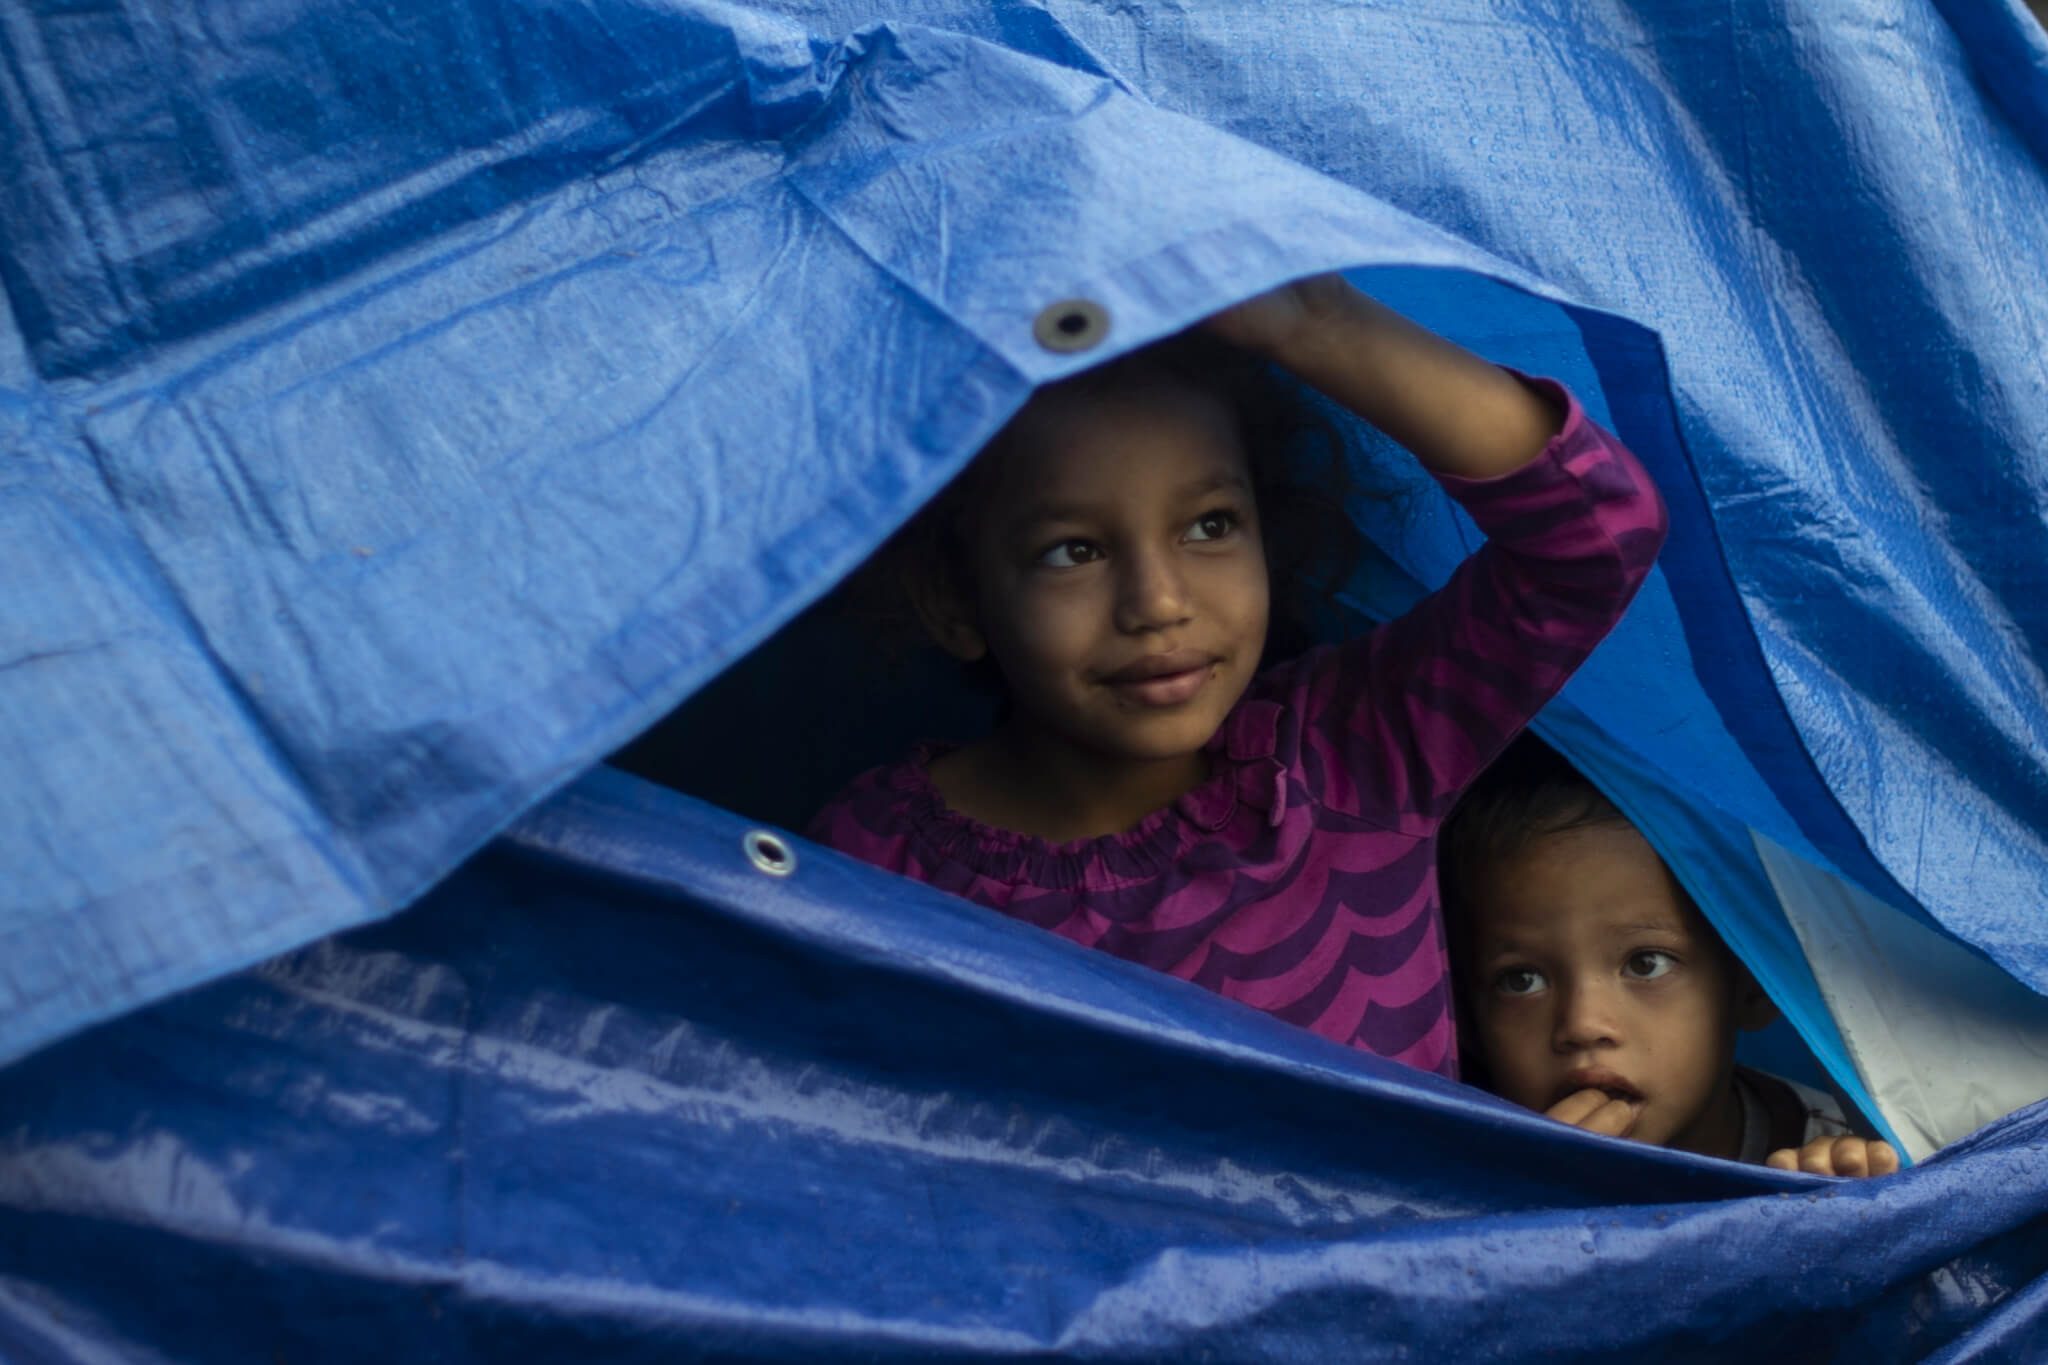 Central American migrant children, part of a caravan whicho has trekked for a month across Central America and Mexico in hopes of reaching the United States, remain at a temporary shelter in Tijuana, Baja California State, Mexico, in the border with the US, on November 29, 2018. - Still stinging from the tear gas that beat back their attempt to breach the US-Mexican border, members of the Central American migrant caravan are starting to lose hope, and in some cases are turning back. (Photo by PEDRO PARDO / AFP)